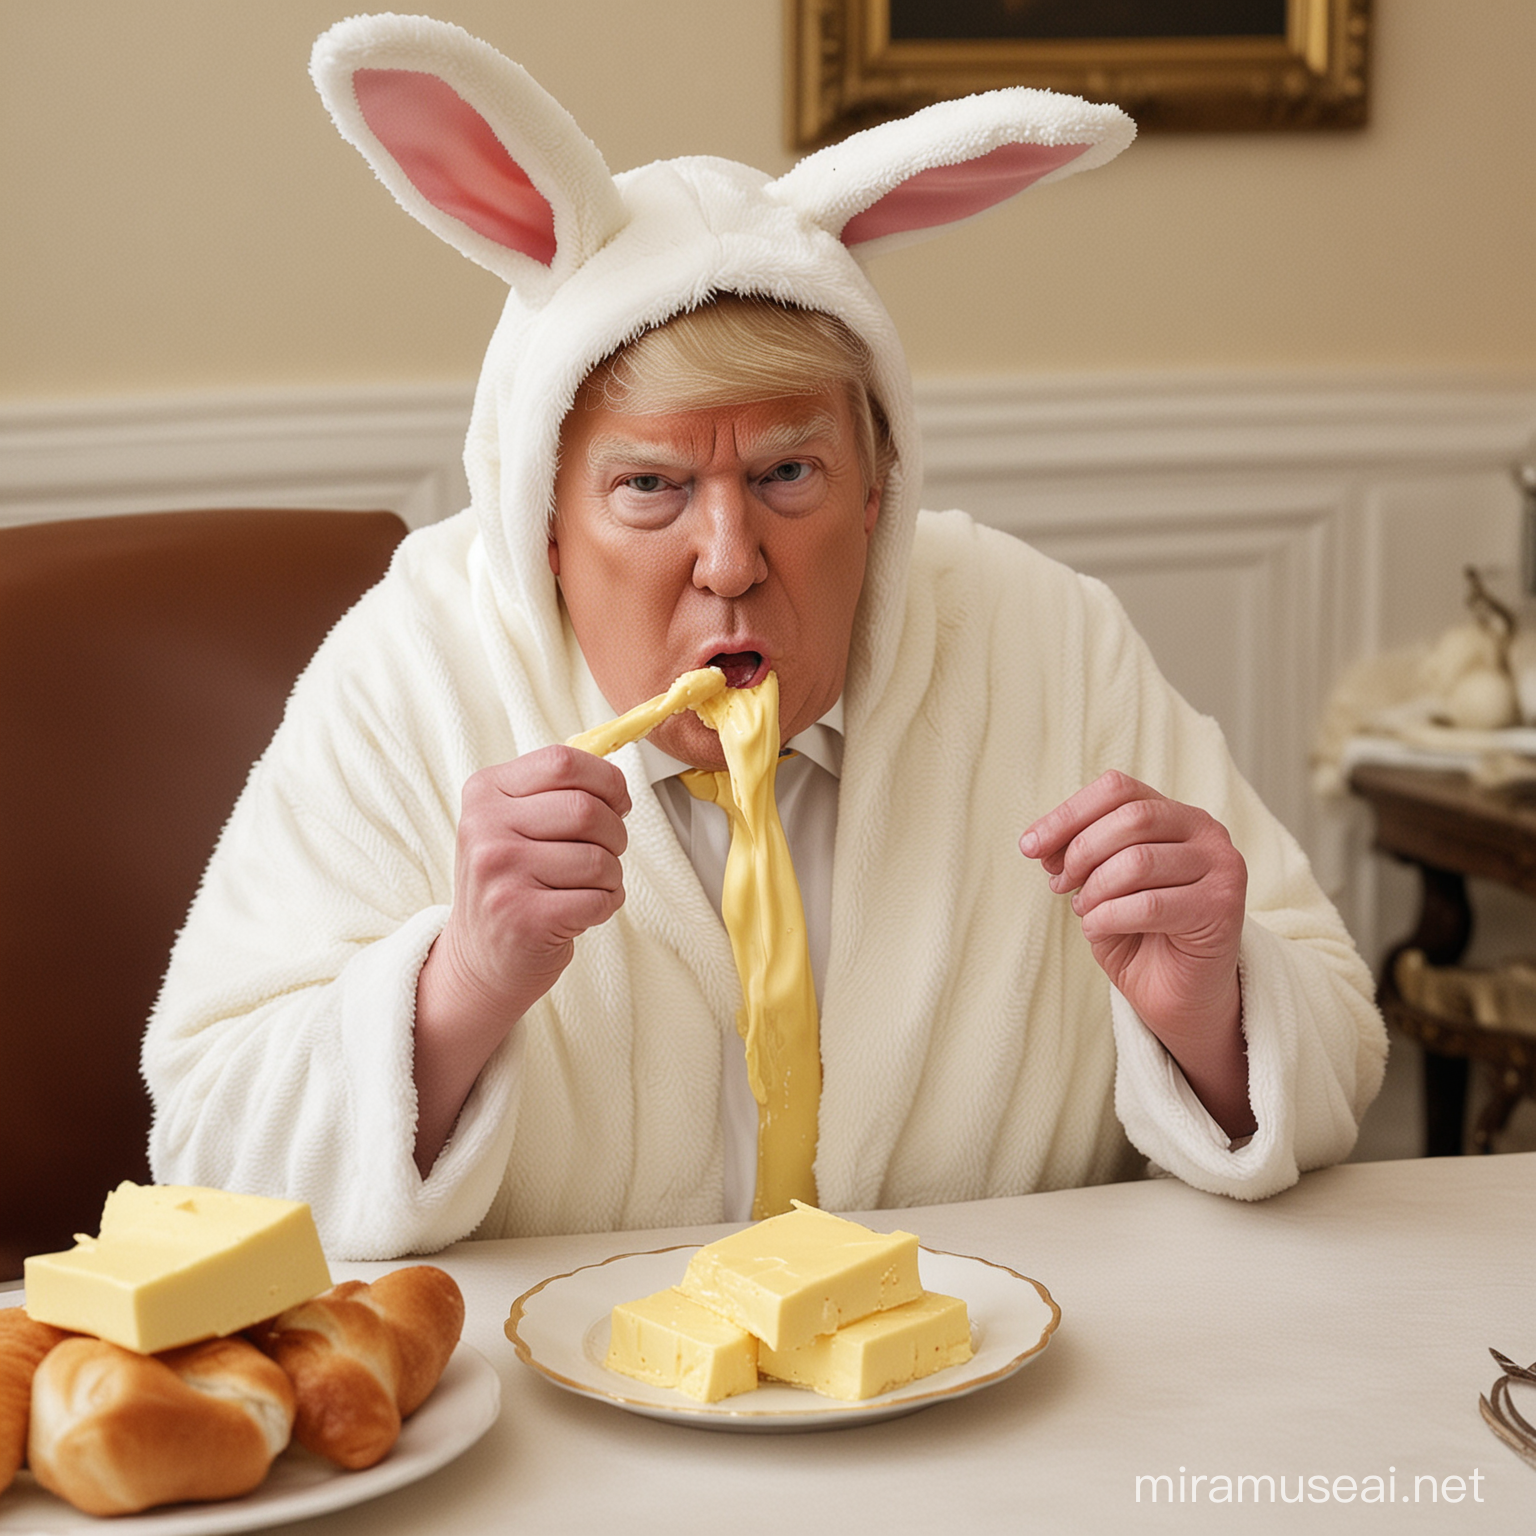 Donald Trump Eating Butter in Bunny Costume